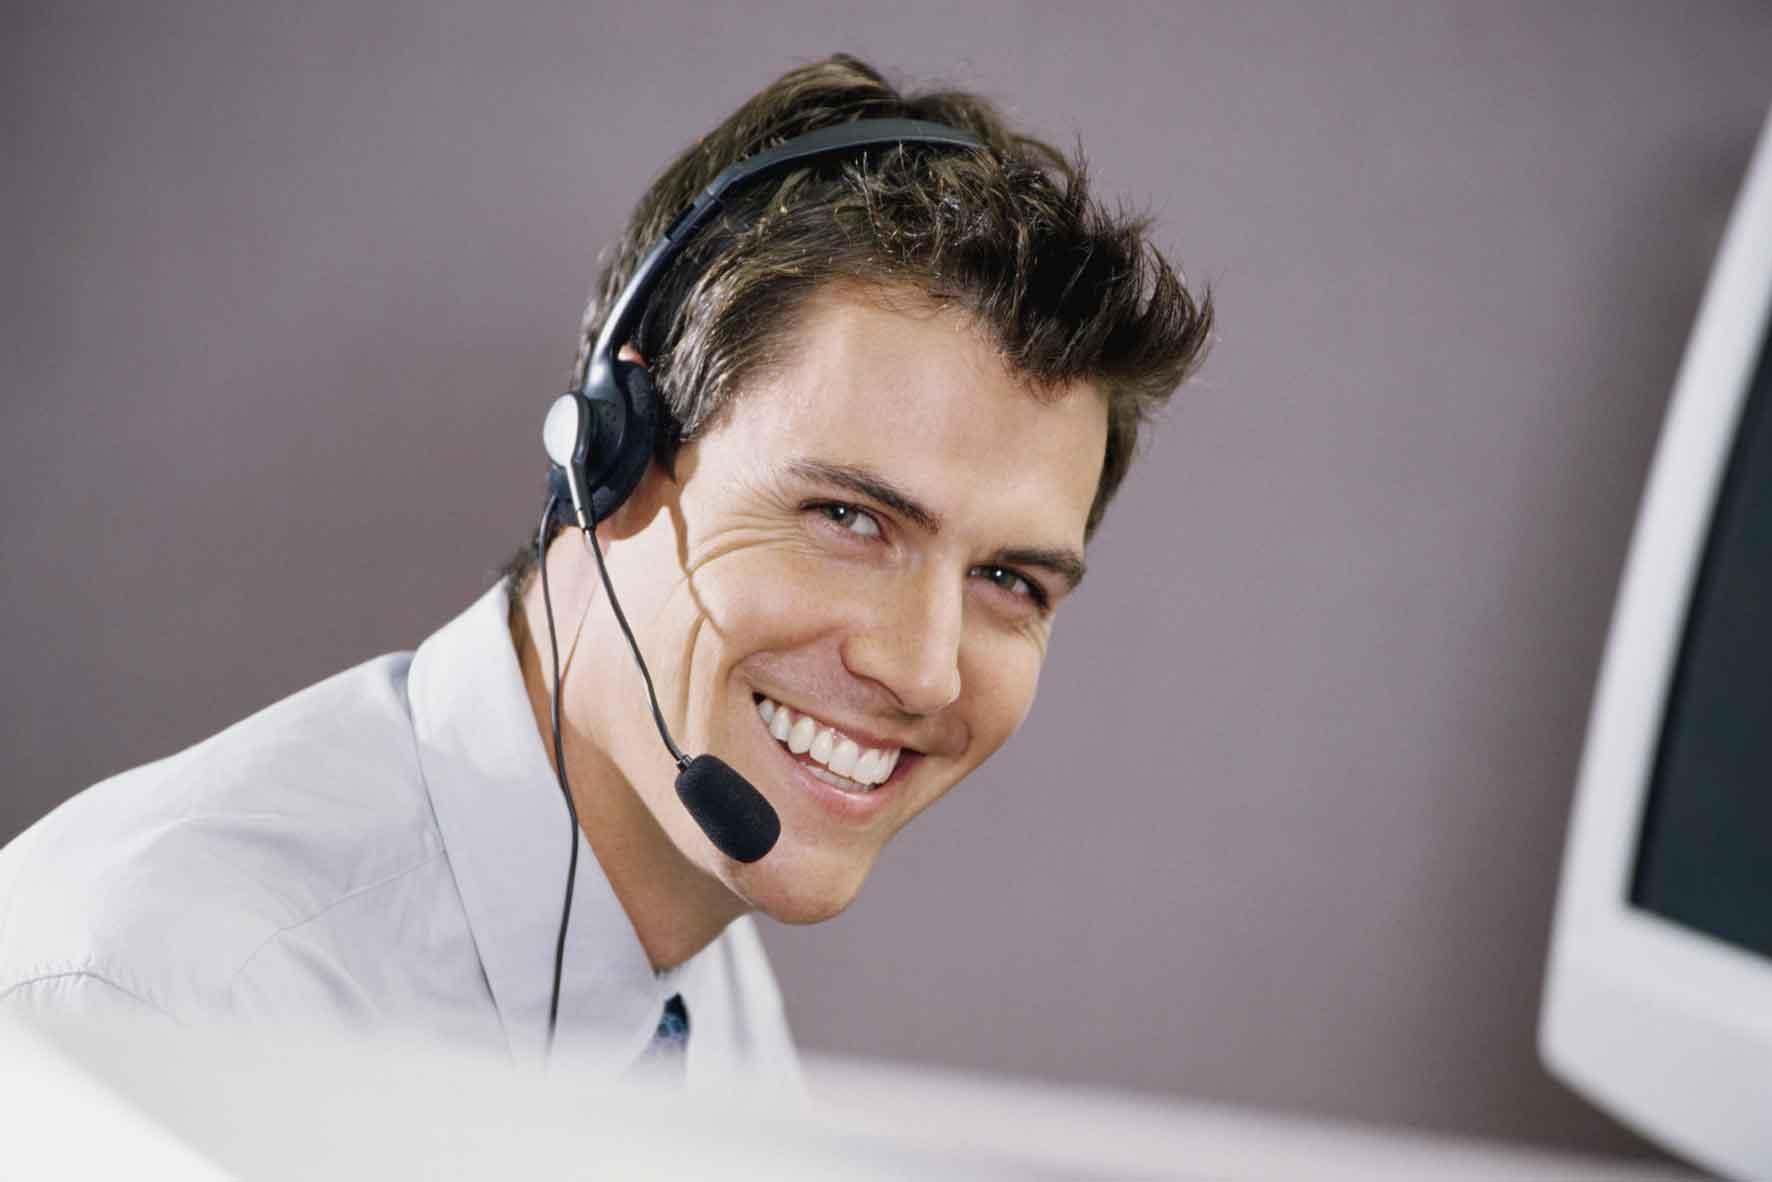 A phone support worker looking extremely happy